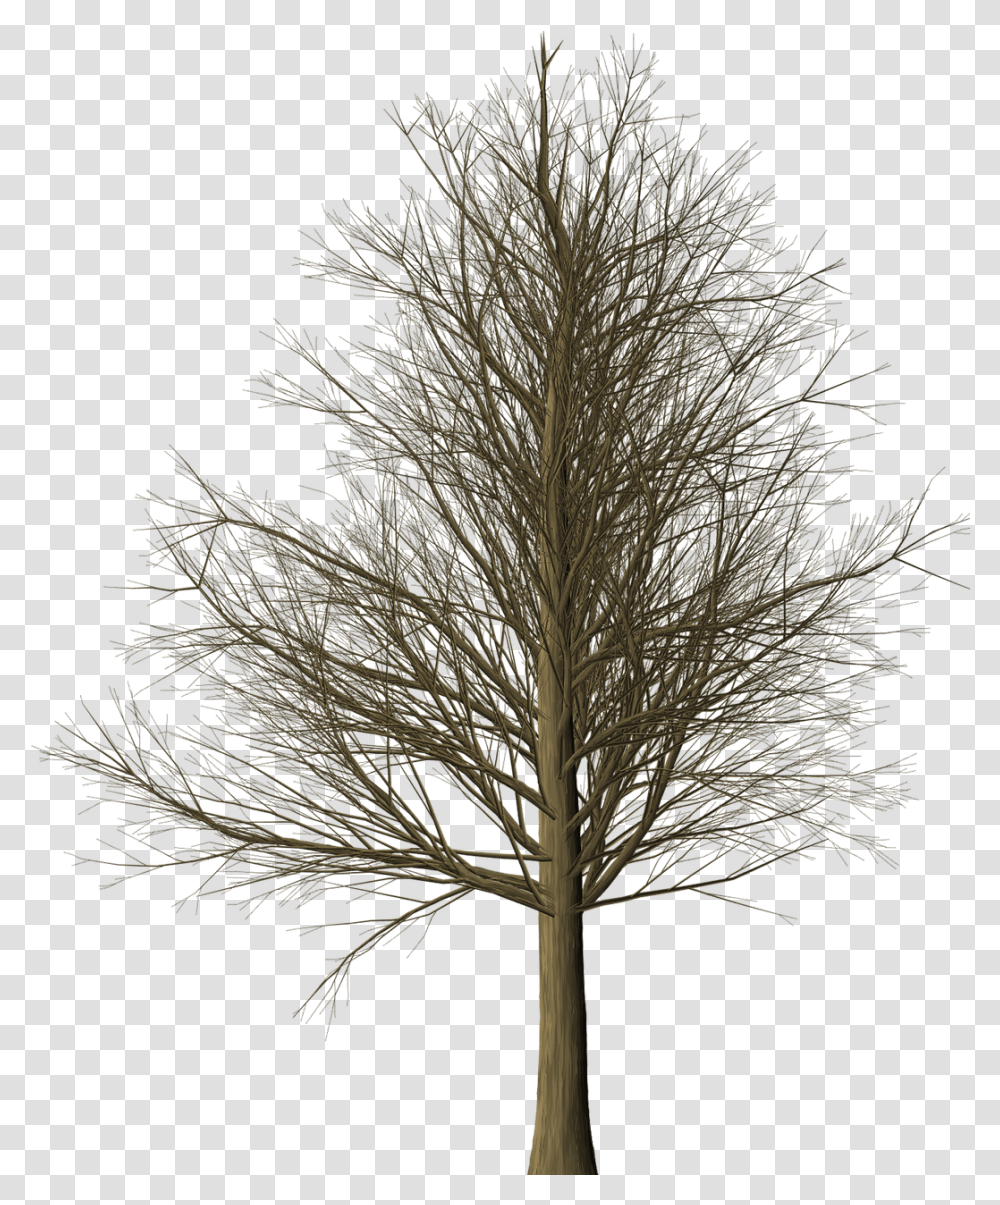 Download Free Photo Of Treebranchesleaflessisolated Albero, Plant, Nature, Outdoors, Vegetation Transparent Png